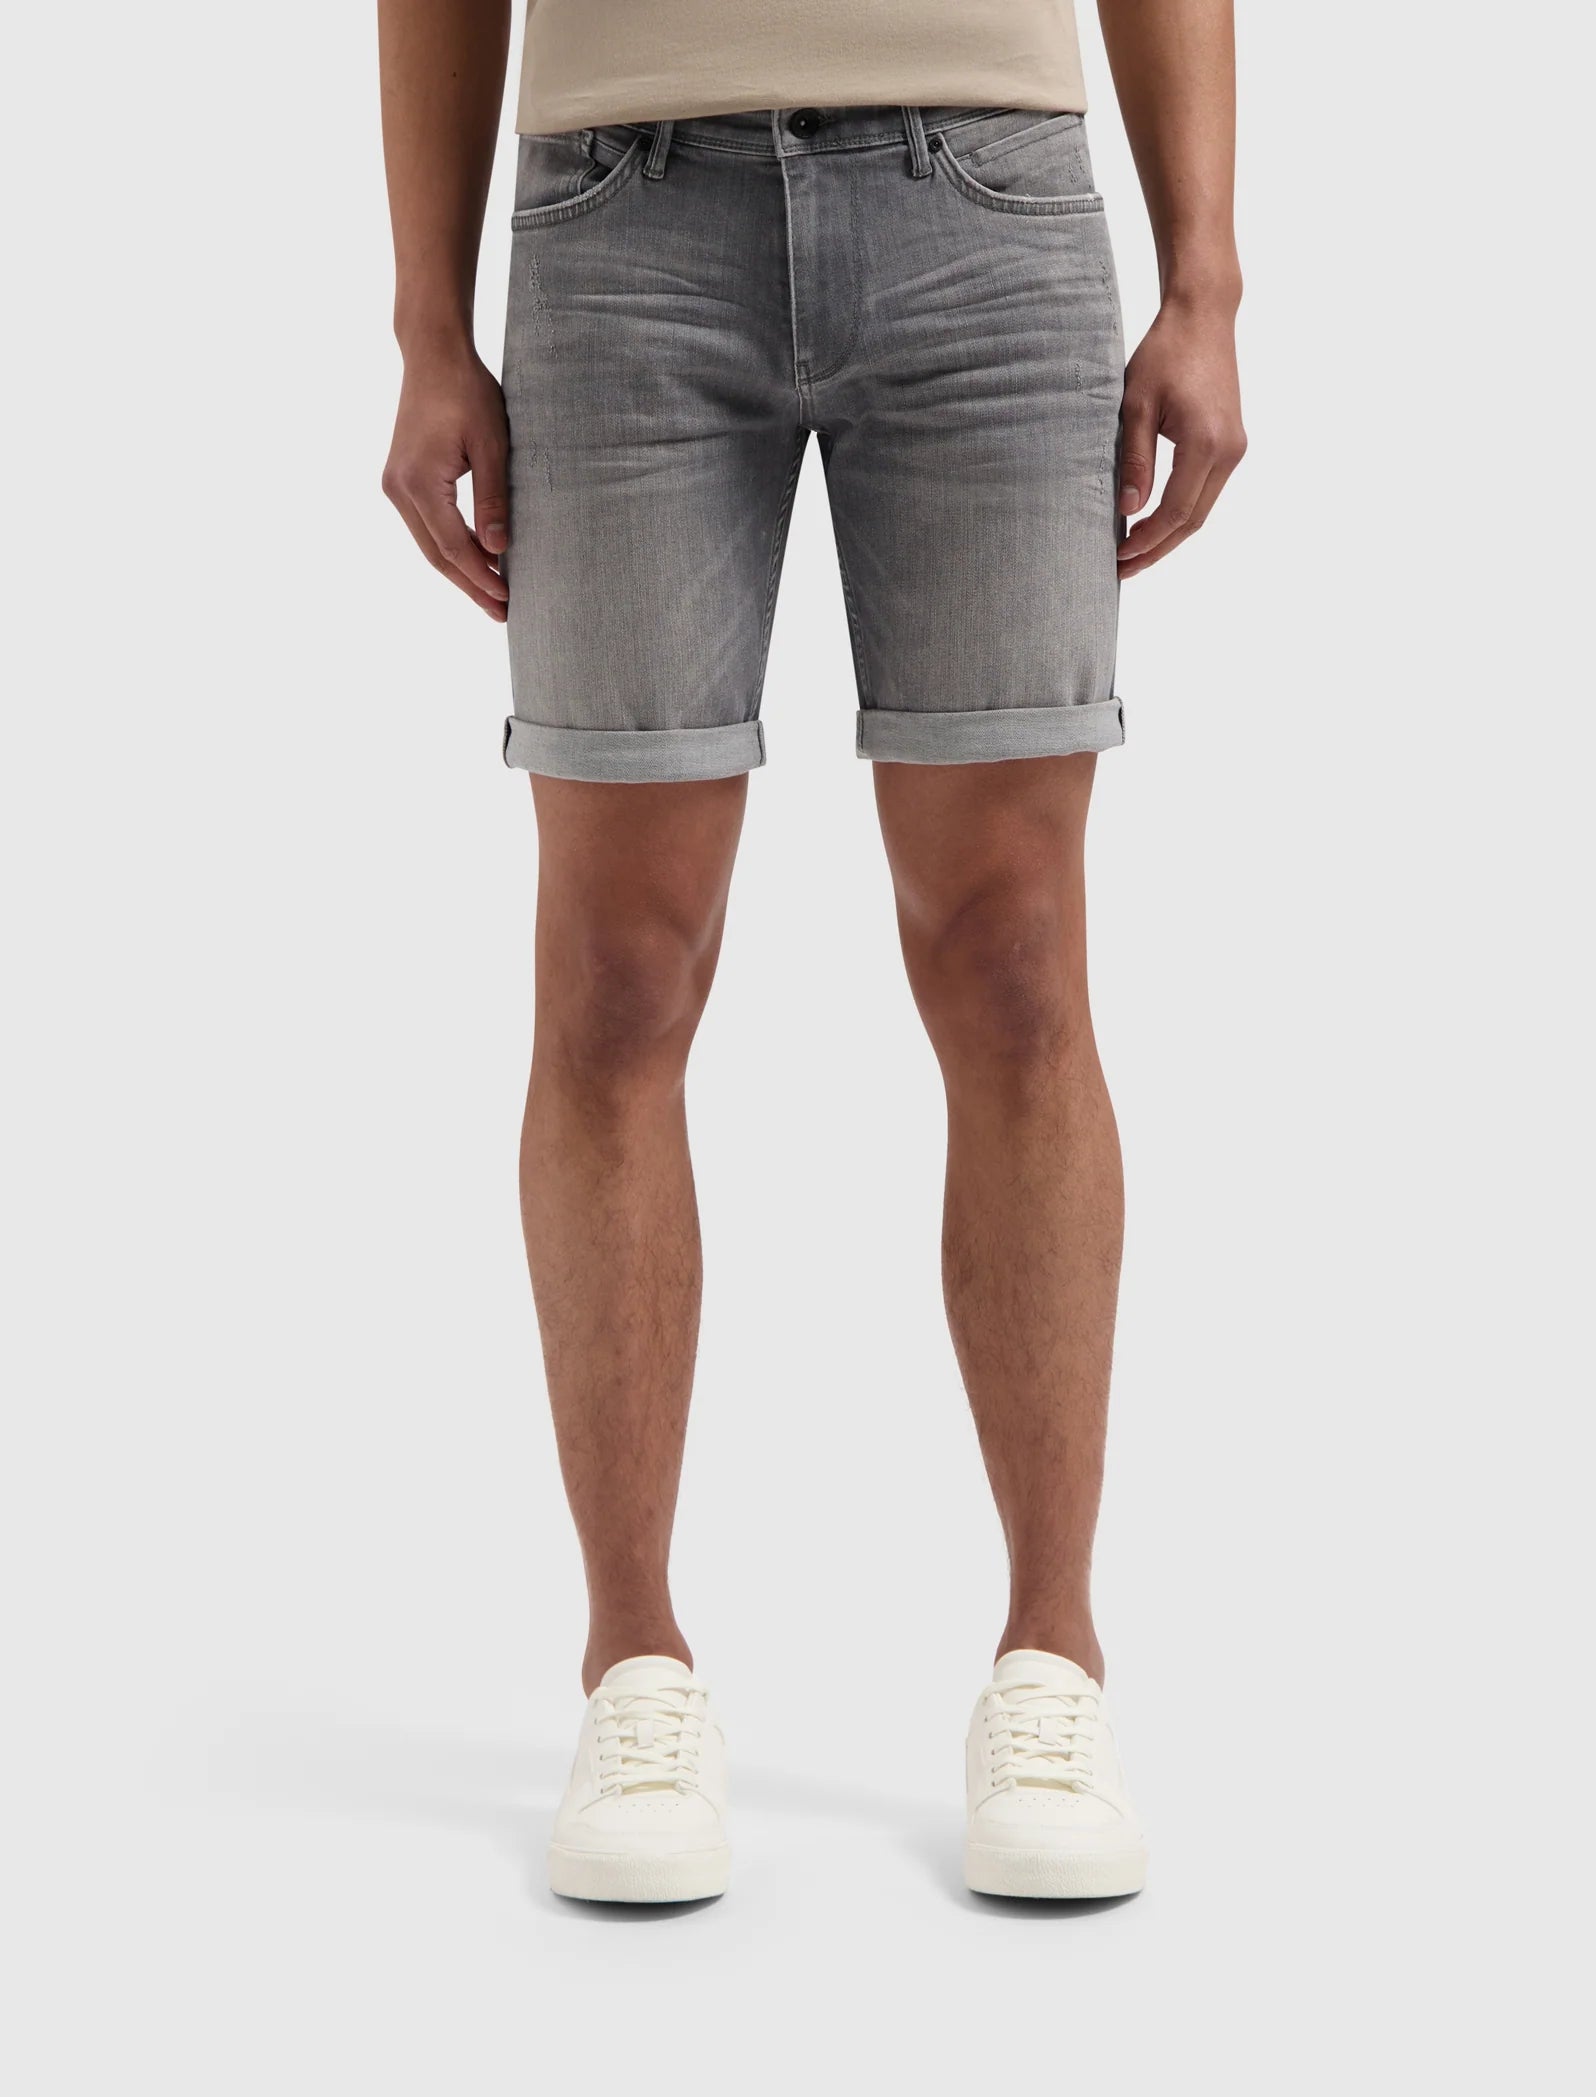 Pure Path Jeans Short The Steve W1263